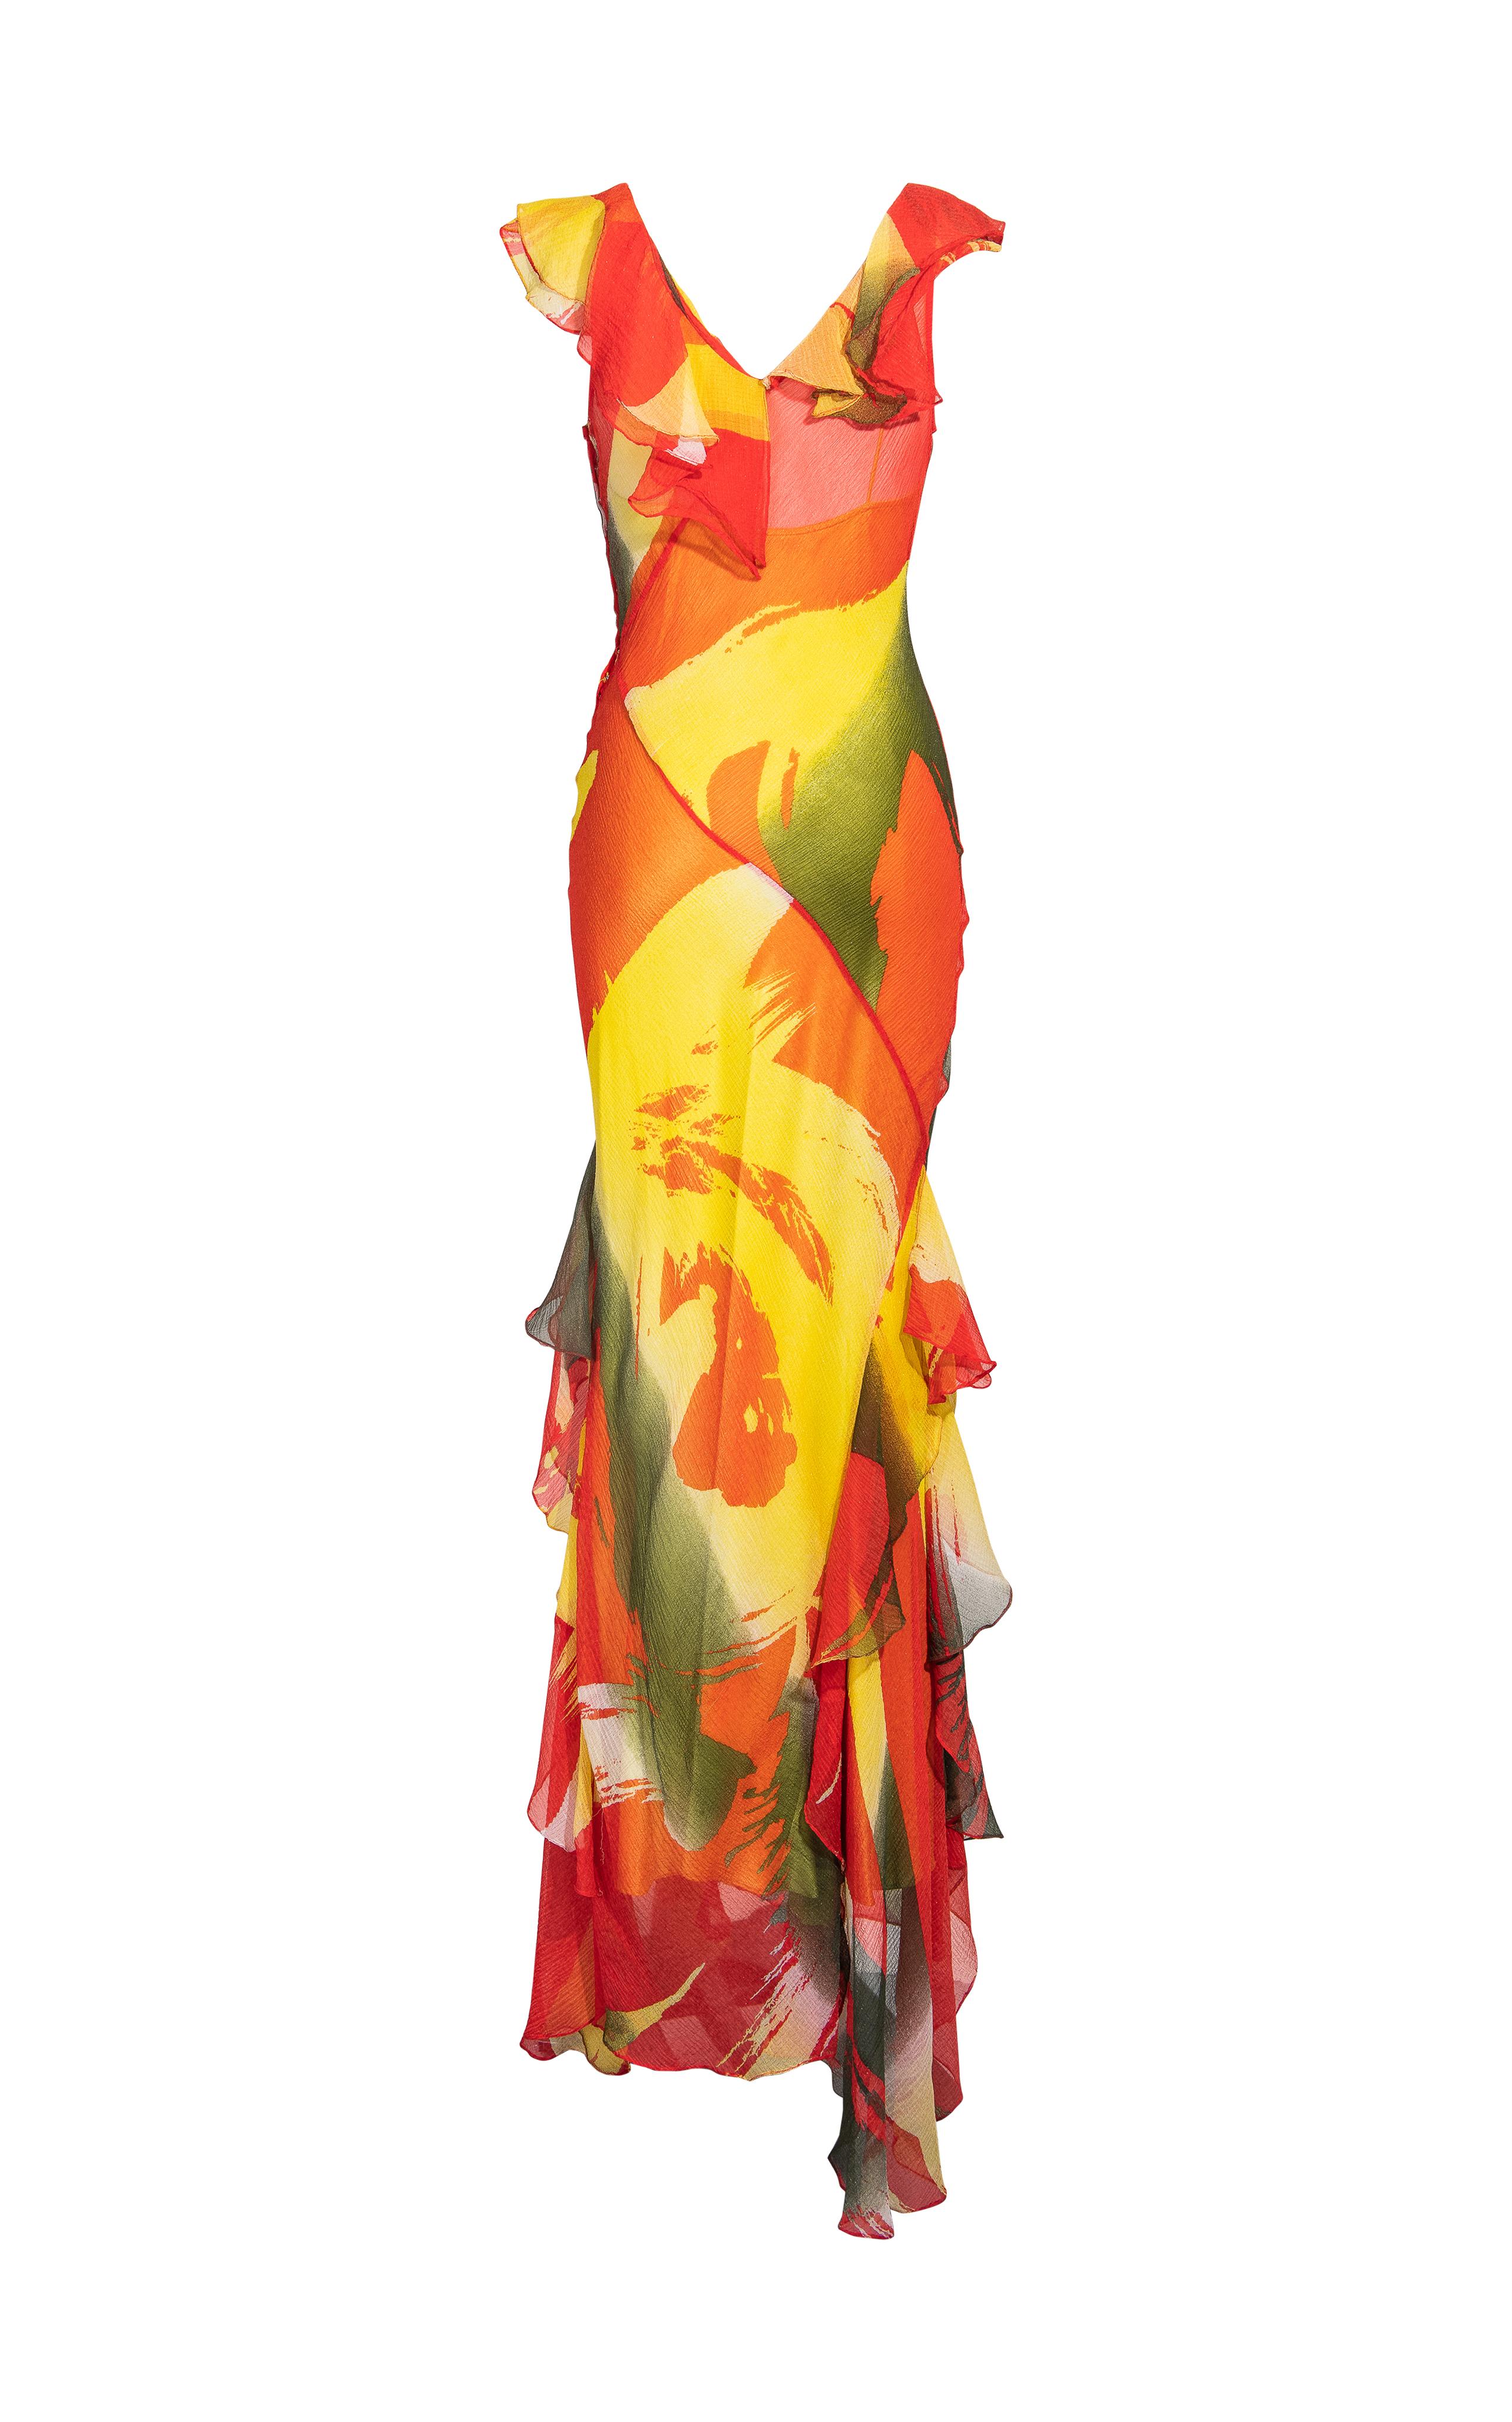 Women's S/S 2005 Stephen Burrows Abstract Print Gown with Ruffle Details